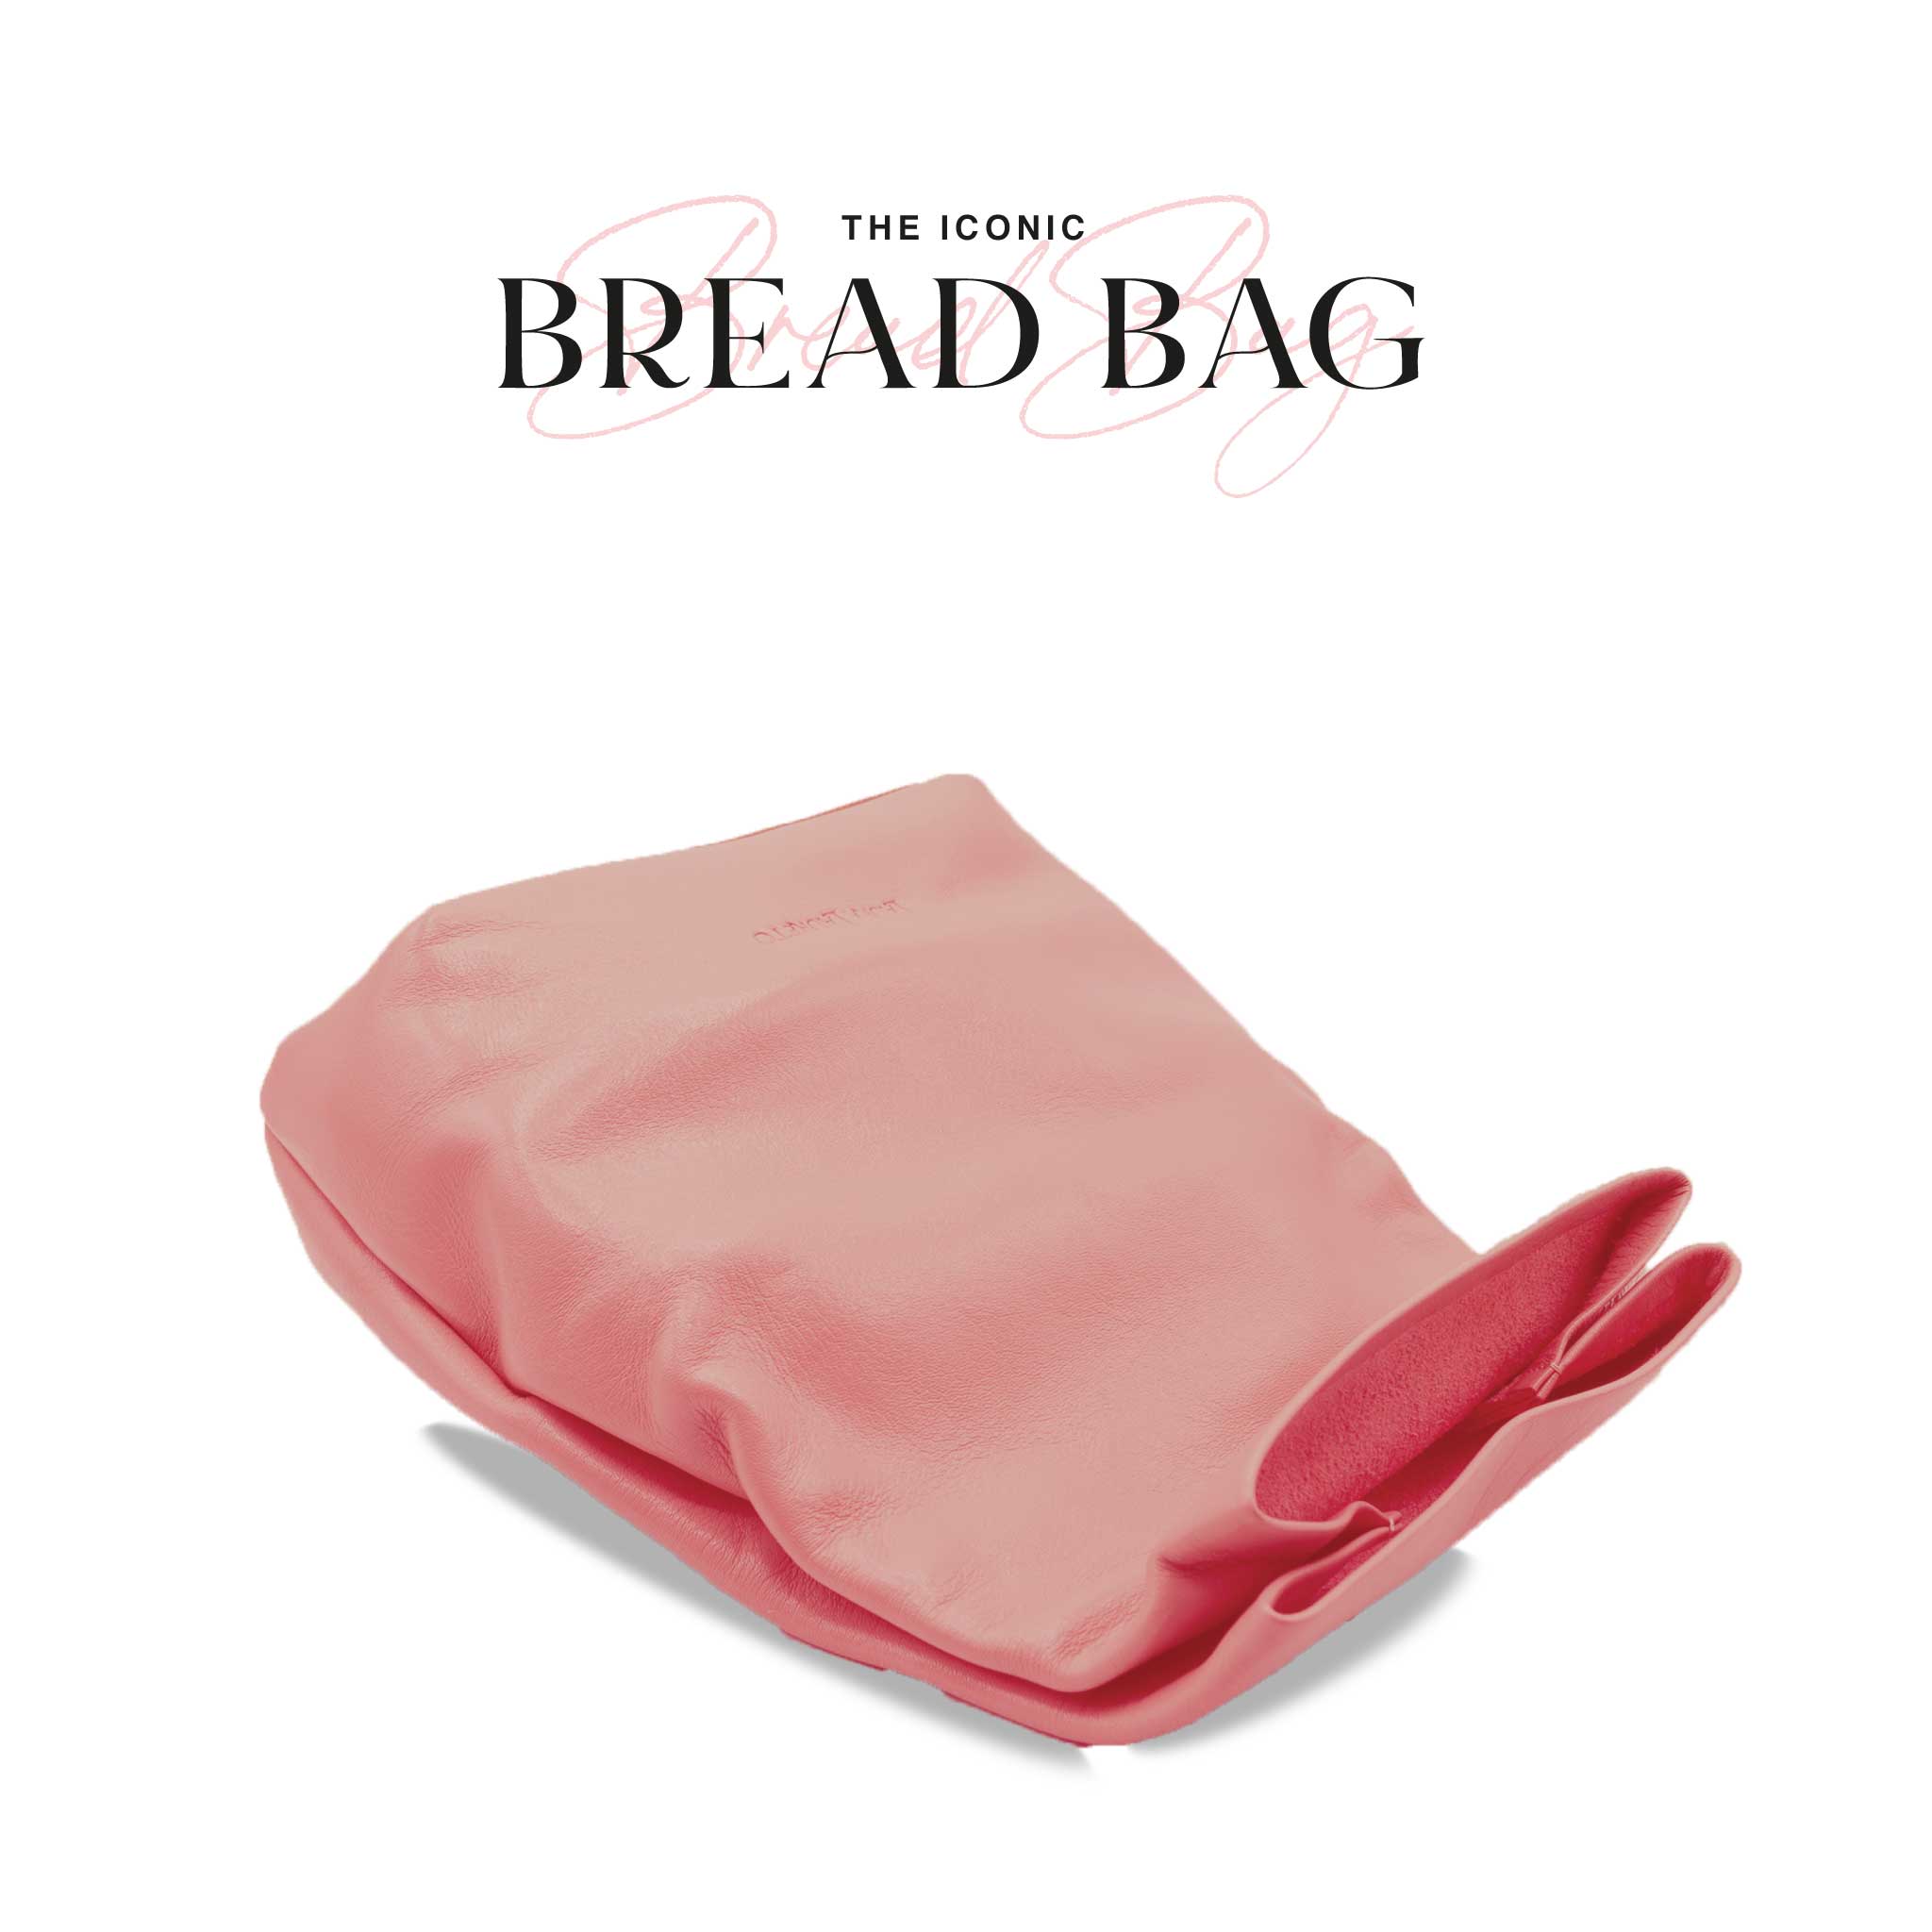 The Iconic Bread Bag®